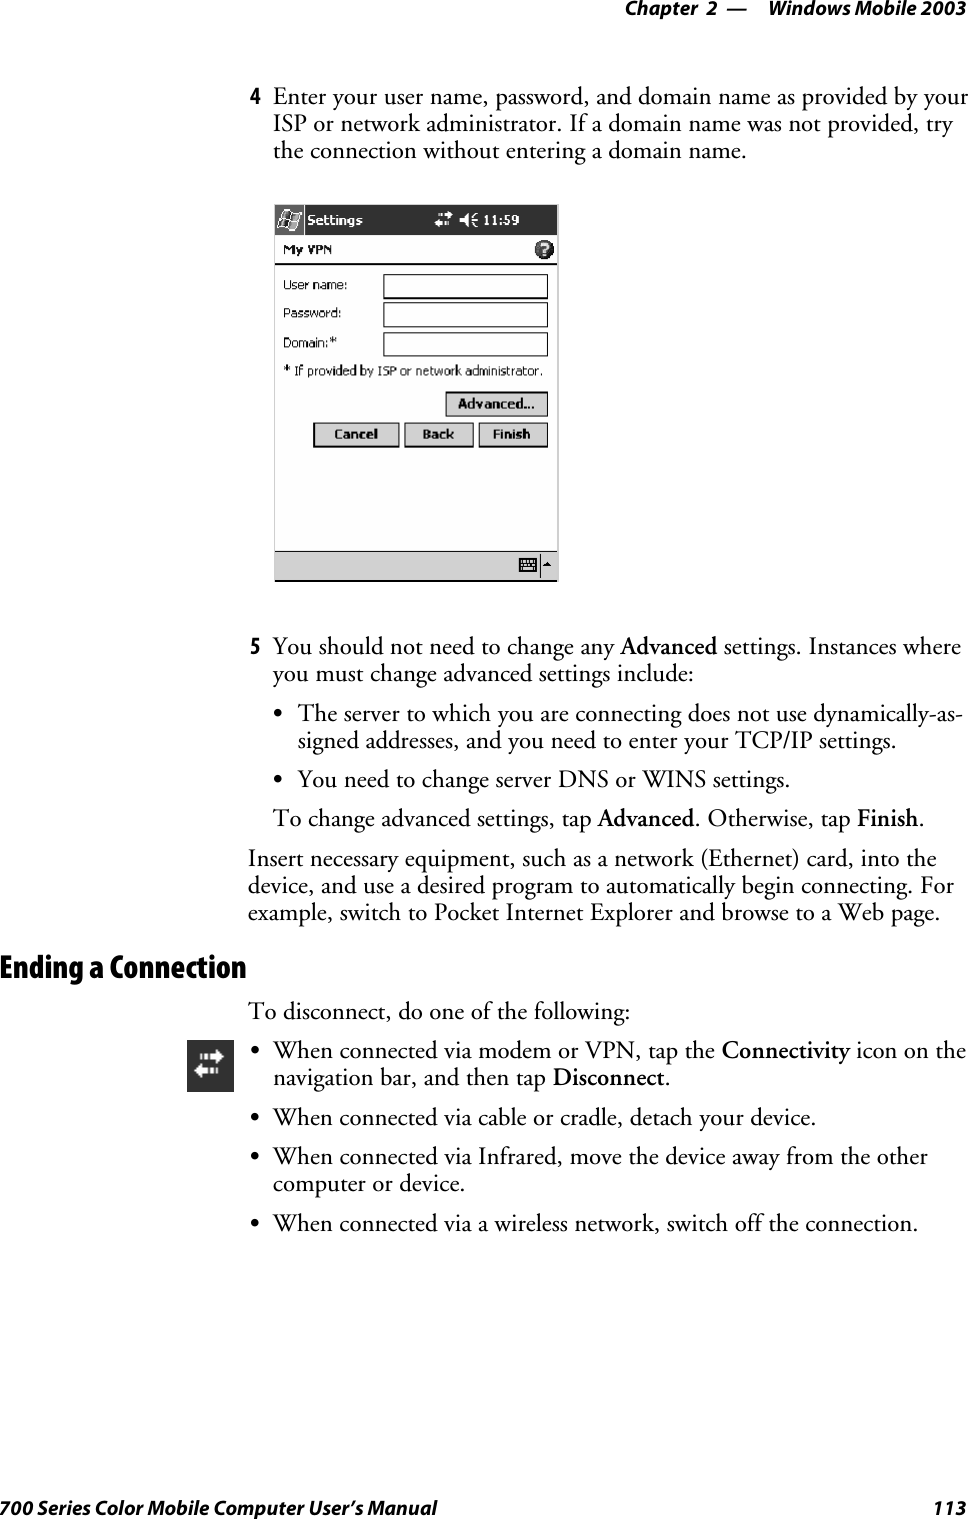 Windows Mobile 2003—Chapter 2113700 Series Color Mobile Computer User’s Manual4Enter your user name, password, and domain name as provided by yourISP or network administrator. If a domain name was not provided, trythe connection without entering a domain name.5You should not need to change any Advanced settings. Instances whereyou must change advanced settings include:SThe server to which you are connecting does not use dynamically-as-signed addresses, and you need to enter your TCP/IP settings.SYou need to change server DNS or WINS settings.To change advanced settings, tap Advanced.Otherwise,tapFinish.Insert necessary equipment, such as a network (Ethernet) card, into thedevice, and use a desired program to automatically begin connecting. Forexample, switch to Pocket Internet Explorer and browse to a Web page.Ending a ConnectionTo disconnect, do one of the following:SWhen connected via modem or VPN, tap the Connectivity icon on thenavigation bar, and then tap Disconnect.SWhen connected via cable or cradle, detach your device.SWhen connected via Infrared, move the device away from the othercomputer or device.SWhen connected via a wireless network, switch off the connection.